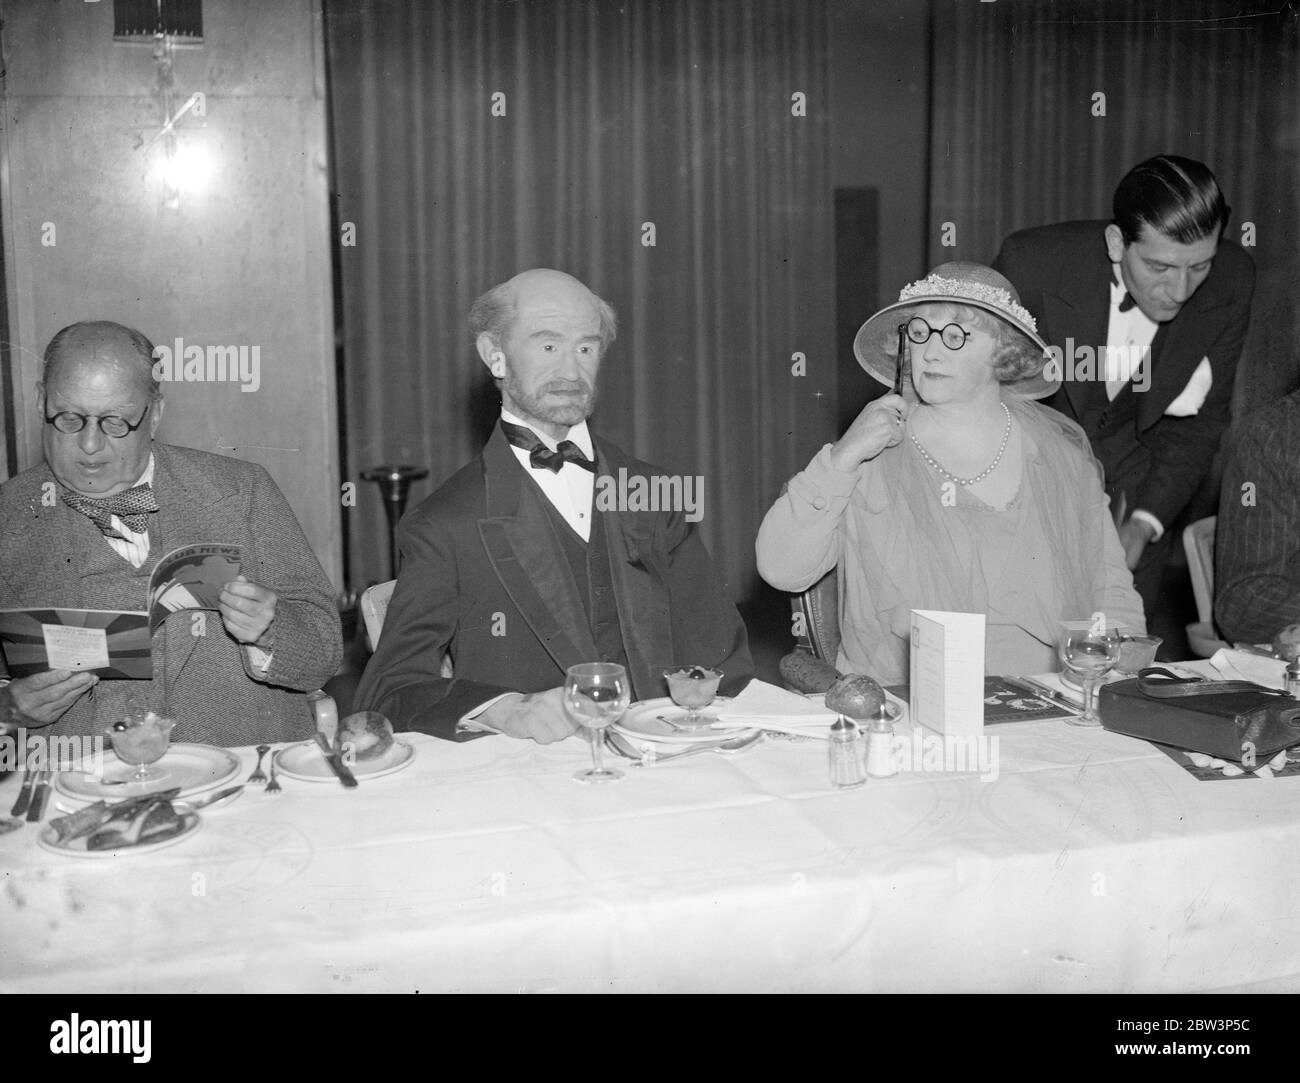 Charlie Peace pressides at crime club luncheon . The effigy of Charlie Price , the notorious criminal , especially loaned from Madame Tussauds Chamber of Horrors , attended the Crime Club luncheon at Grosvenor House and sat at the same table as the C I D men . 18 July 1935 . Stock Photo